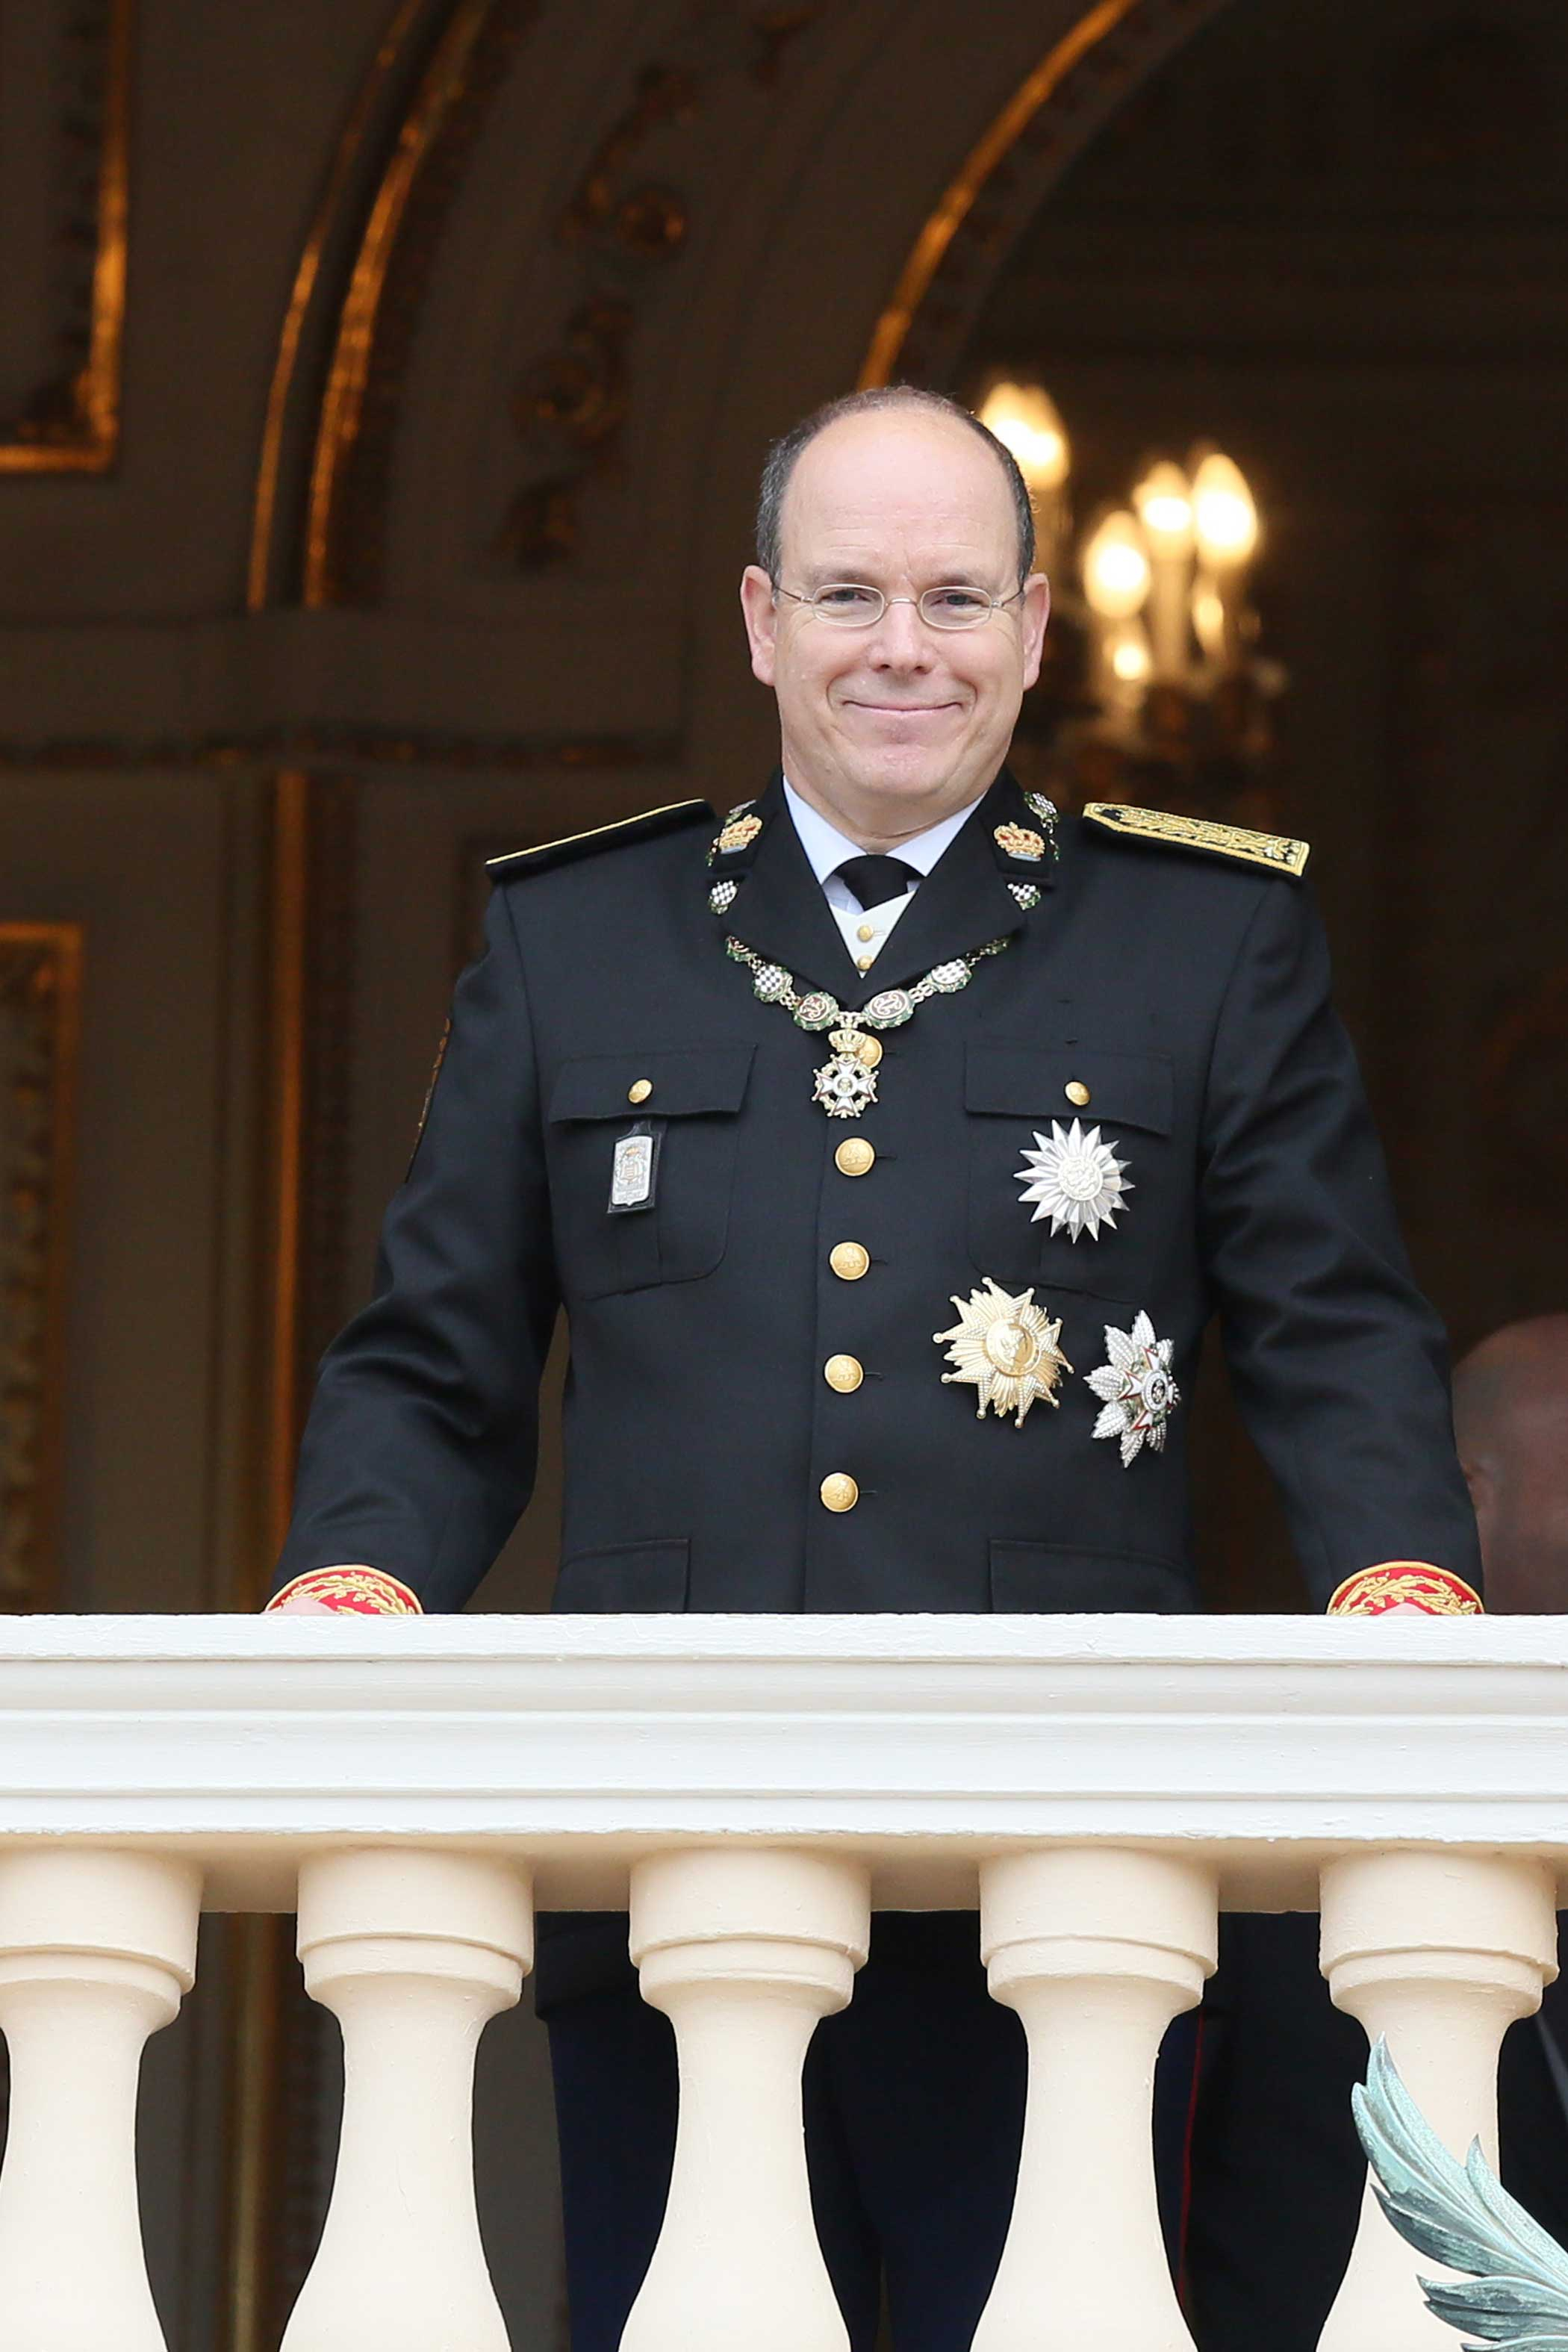 Prince Albert II of Monaco attends the National Day Parade as part of Monaco National Day Celebrations at Monaco Palace on Nov. 19, 2013 in Monte-Carlo, Monaco.